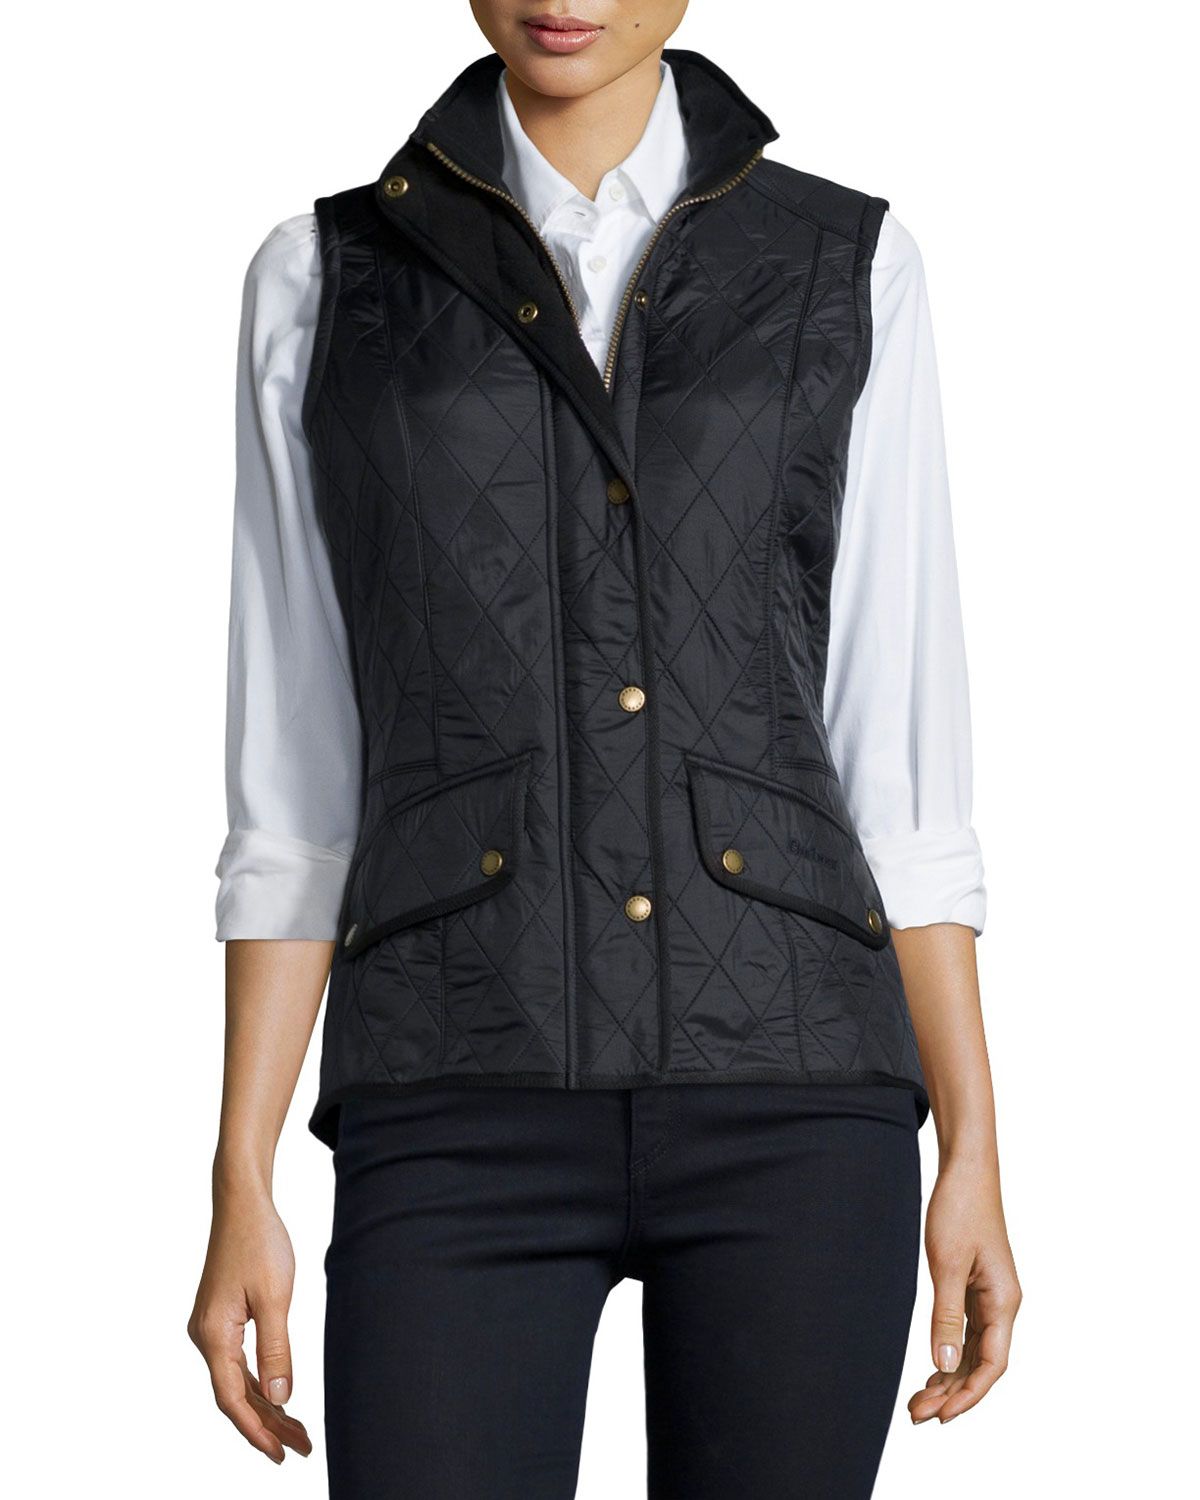 Barbour Diamond-Quilted Sleeveless Vest in Black | Lyst